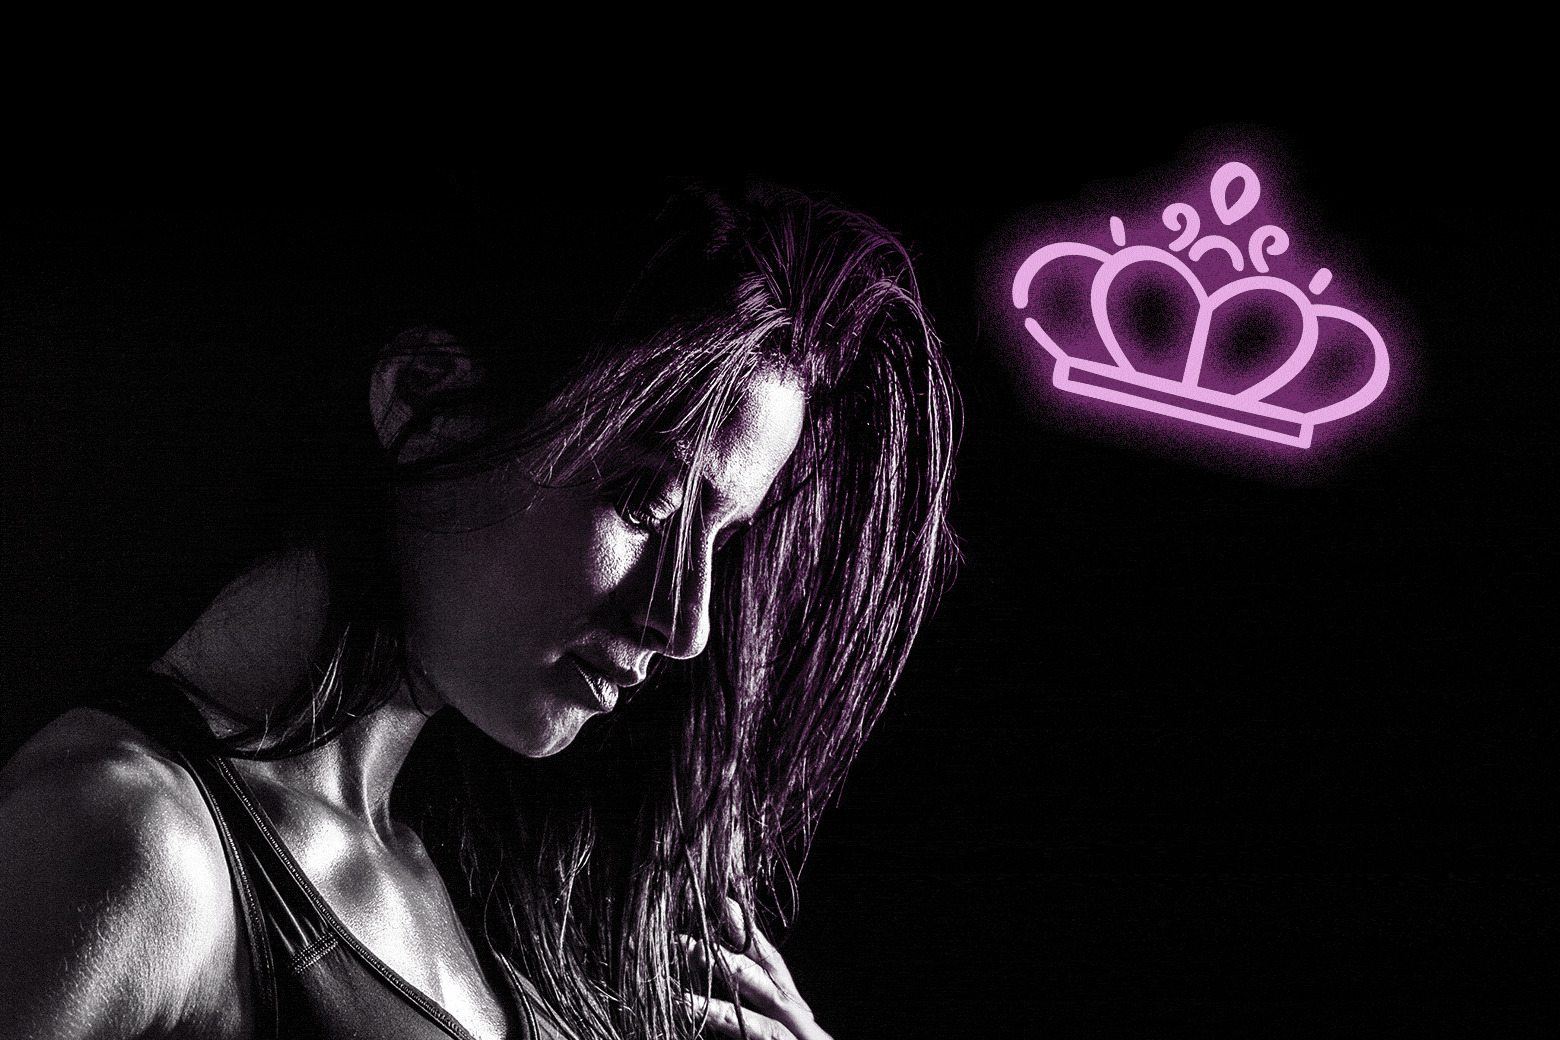 A woman looks down with a floating neon crown next to her face.